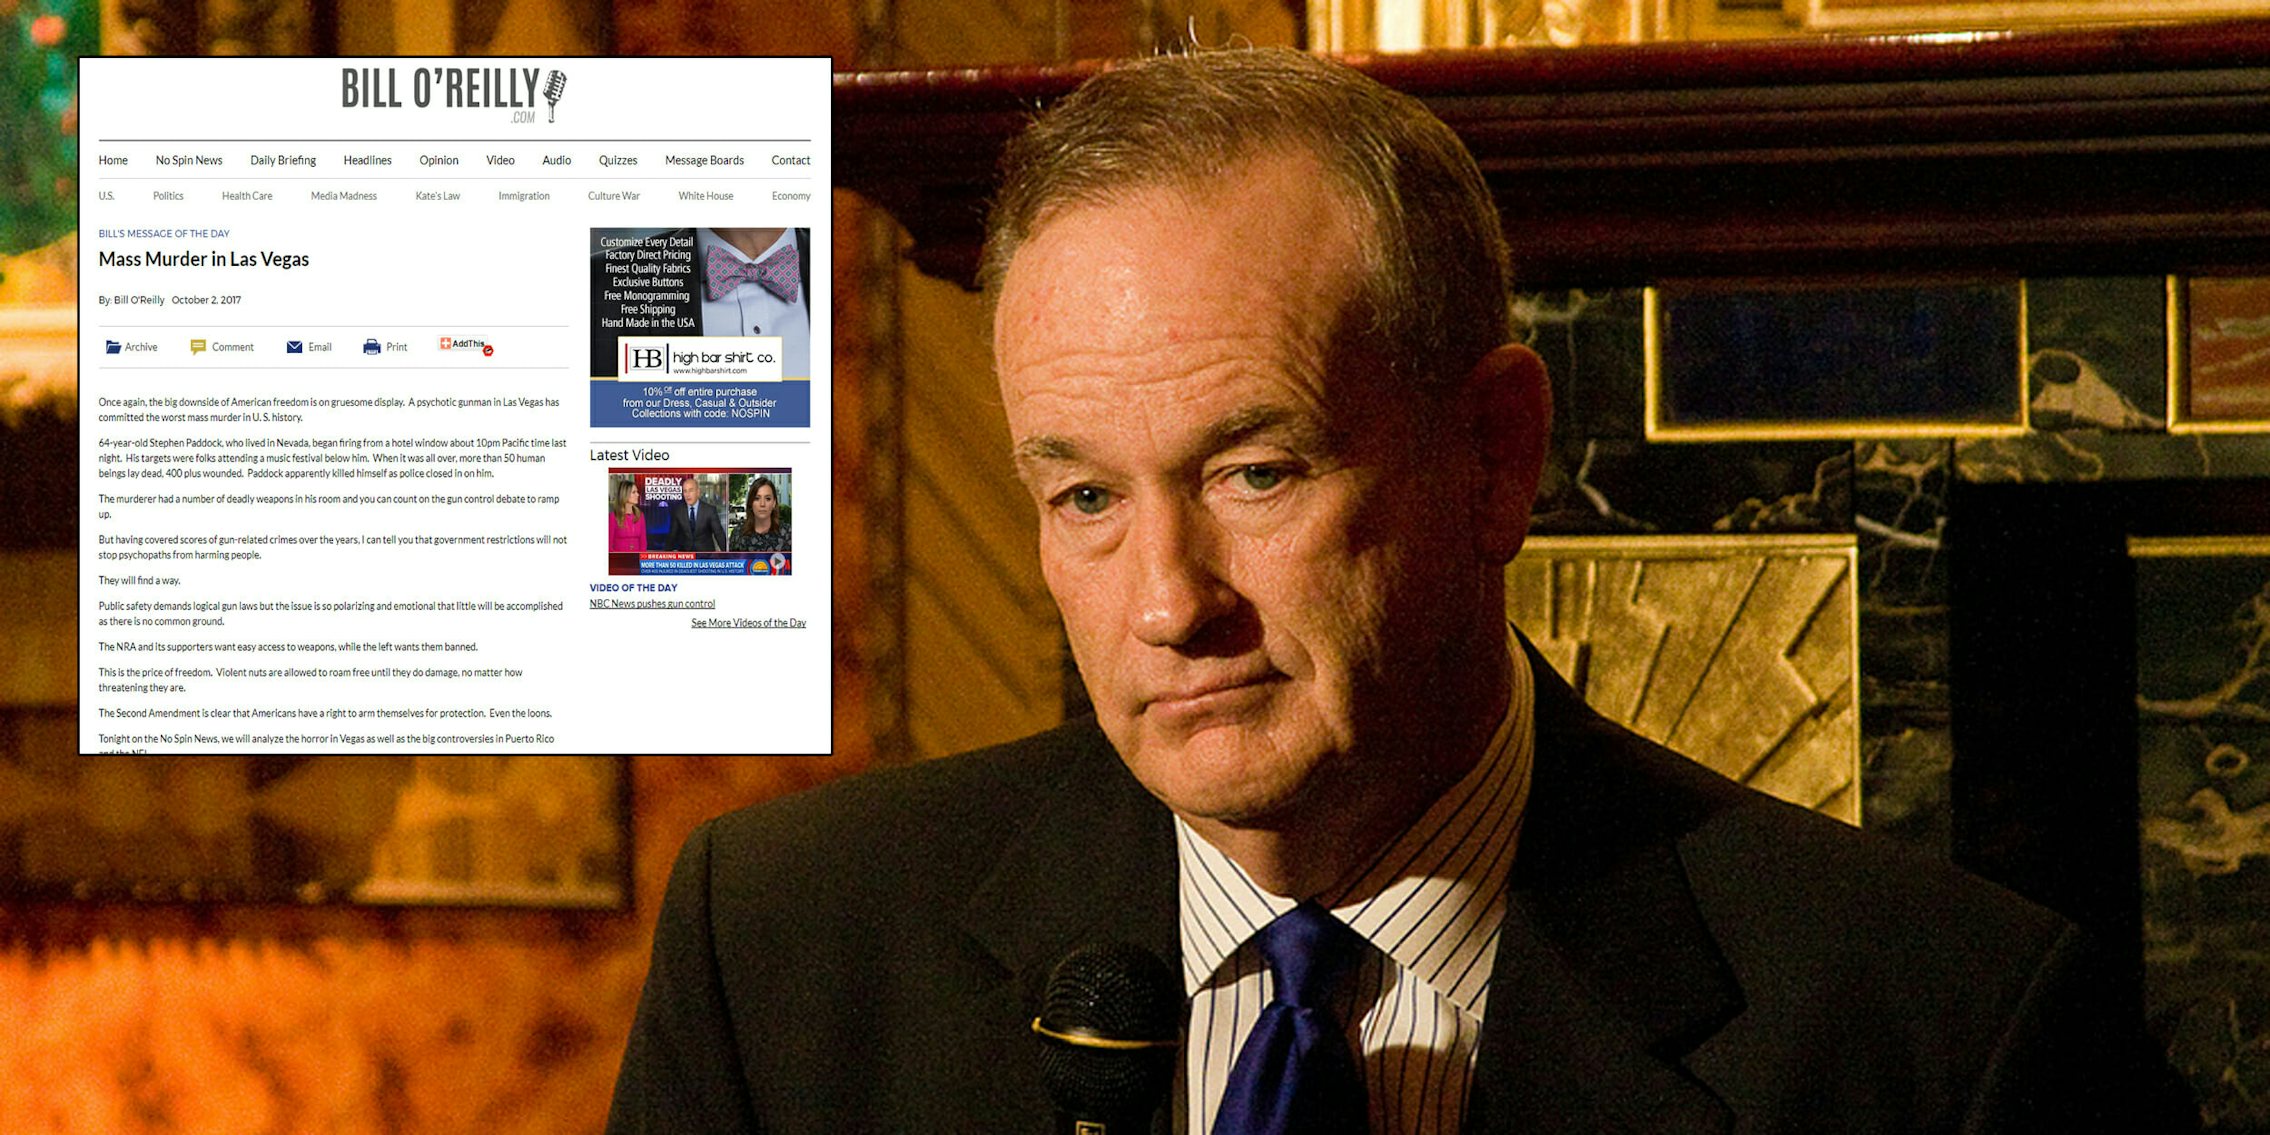 Bill O'Reilly called the Las Vegas shooting the 'price of freedom' in a blog post